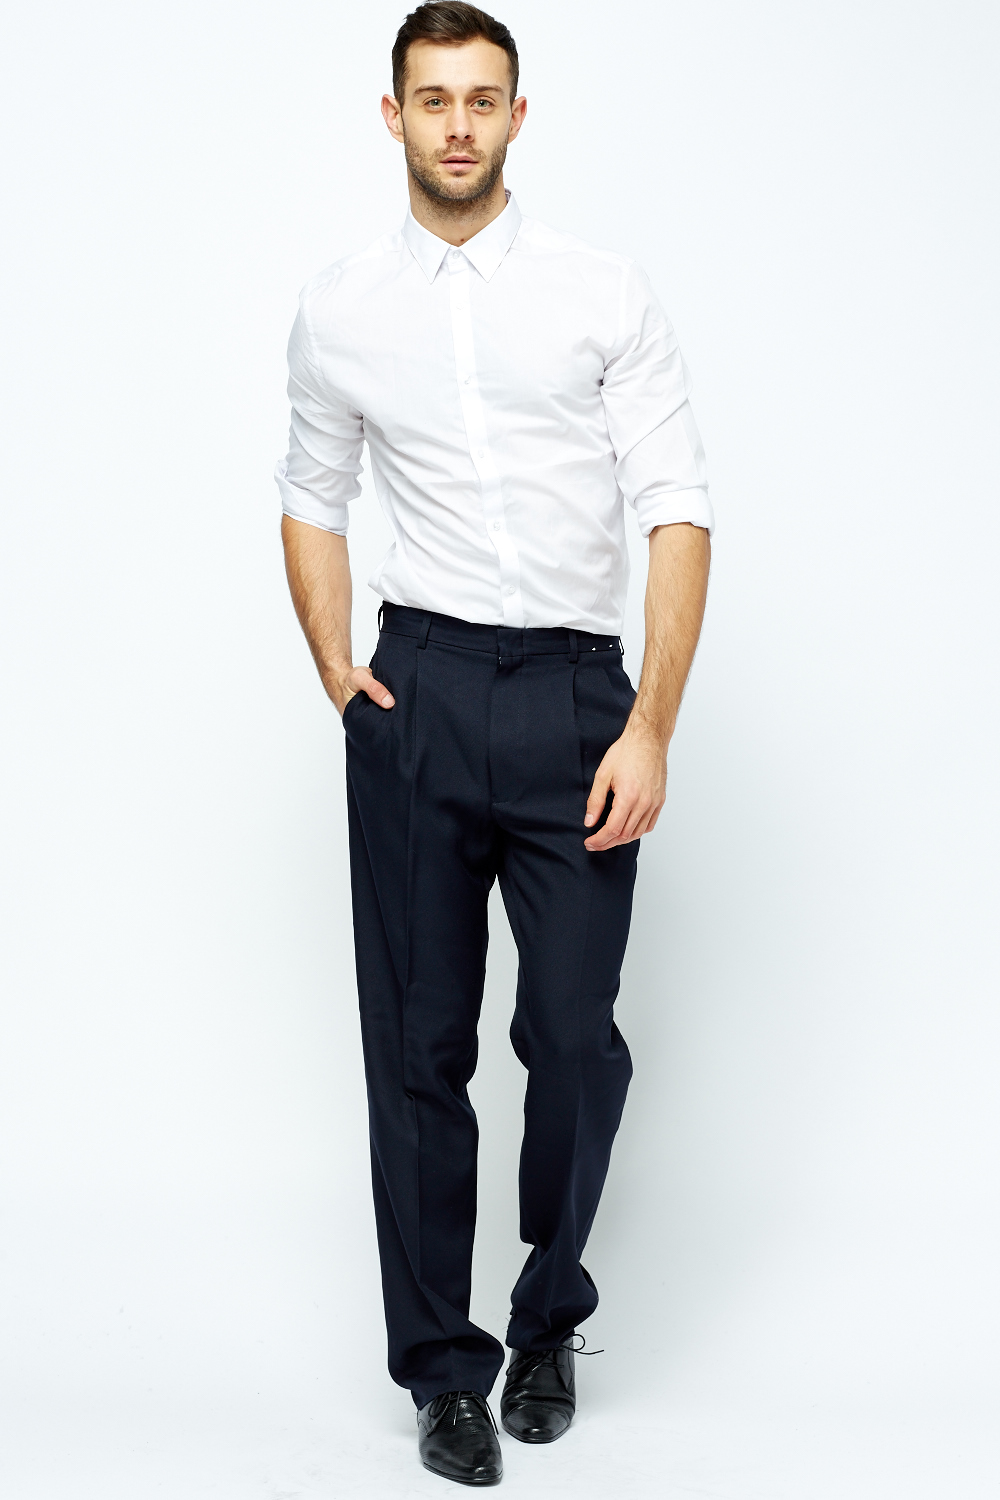 Fitted Formal Mens Trousers - Just $7